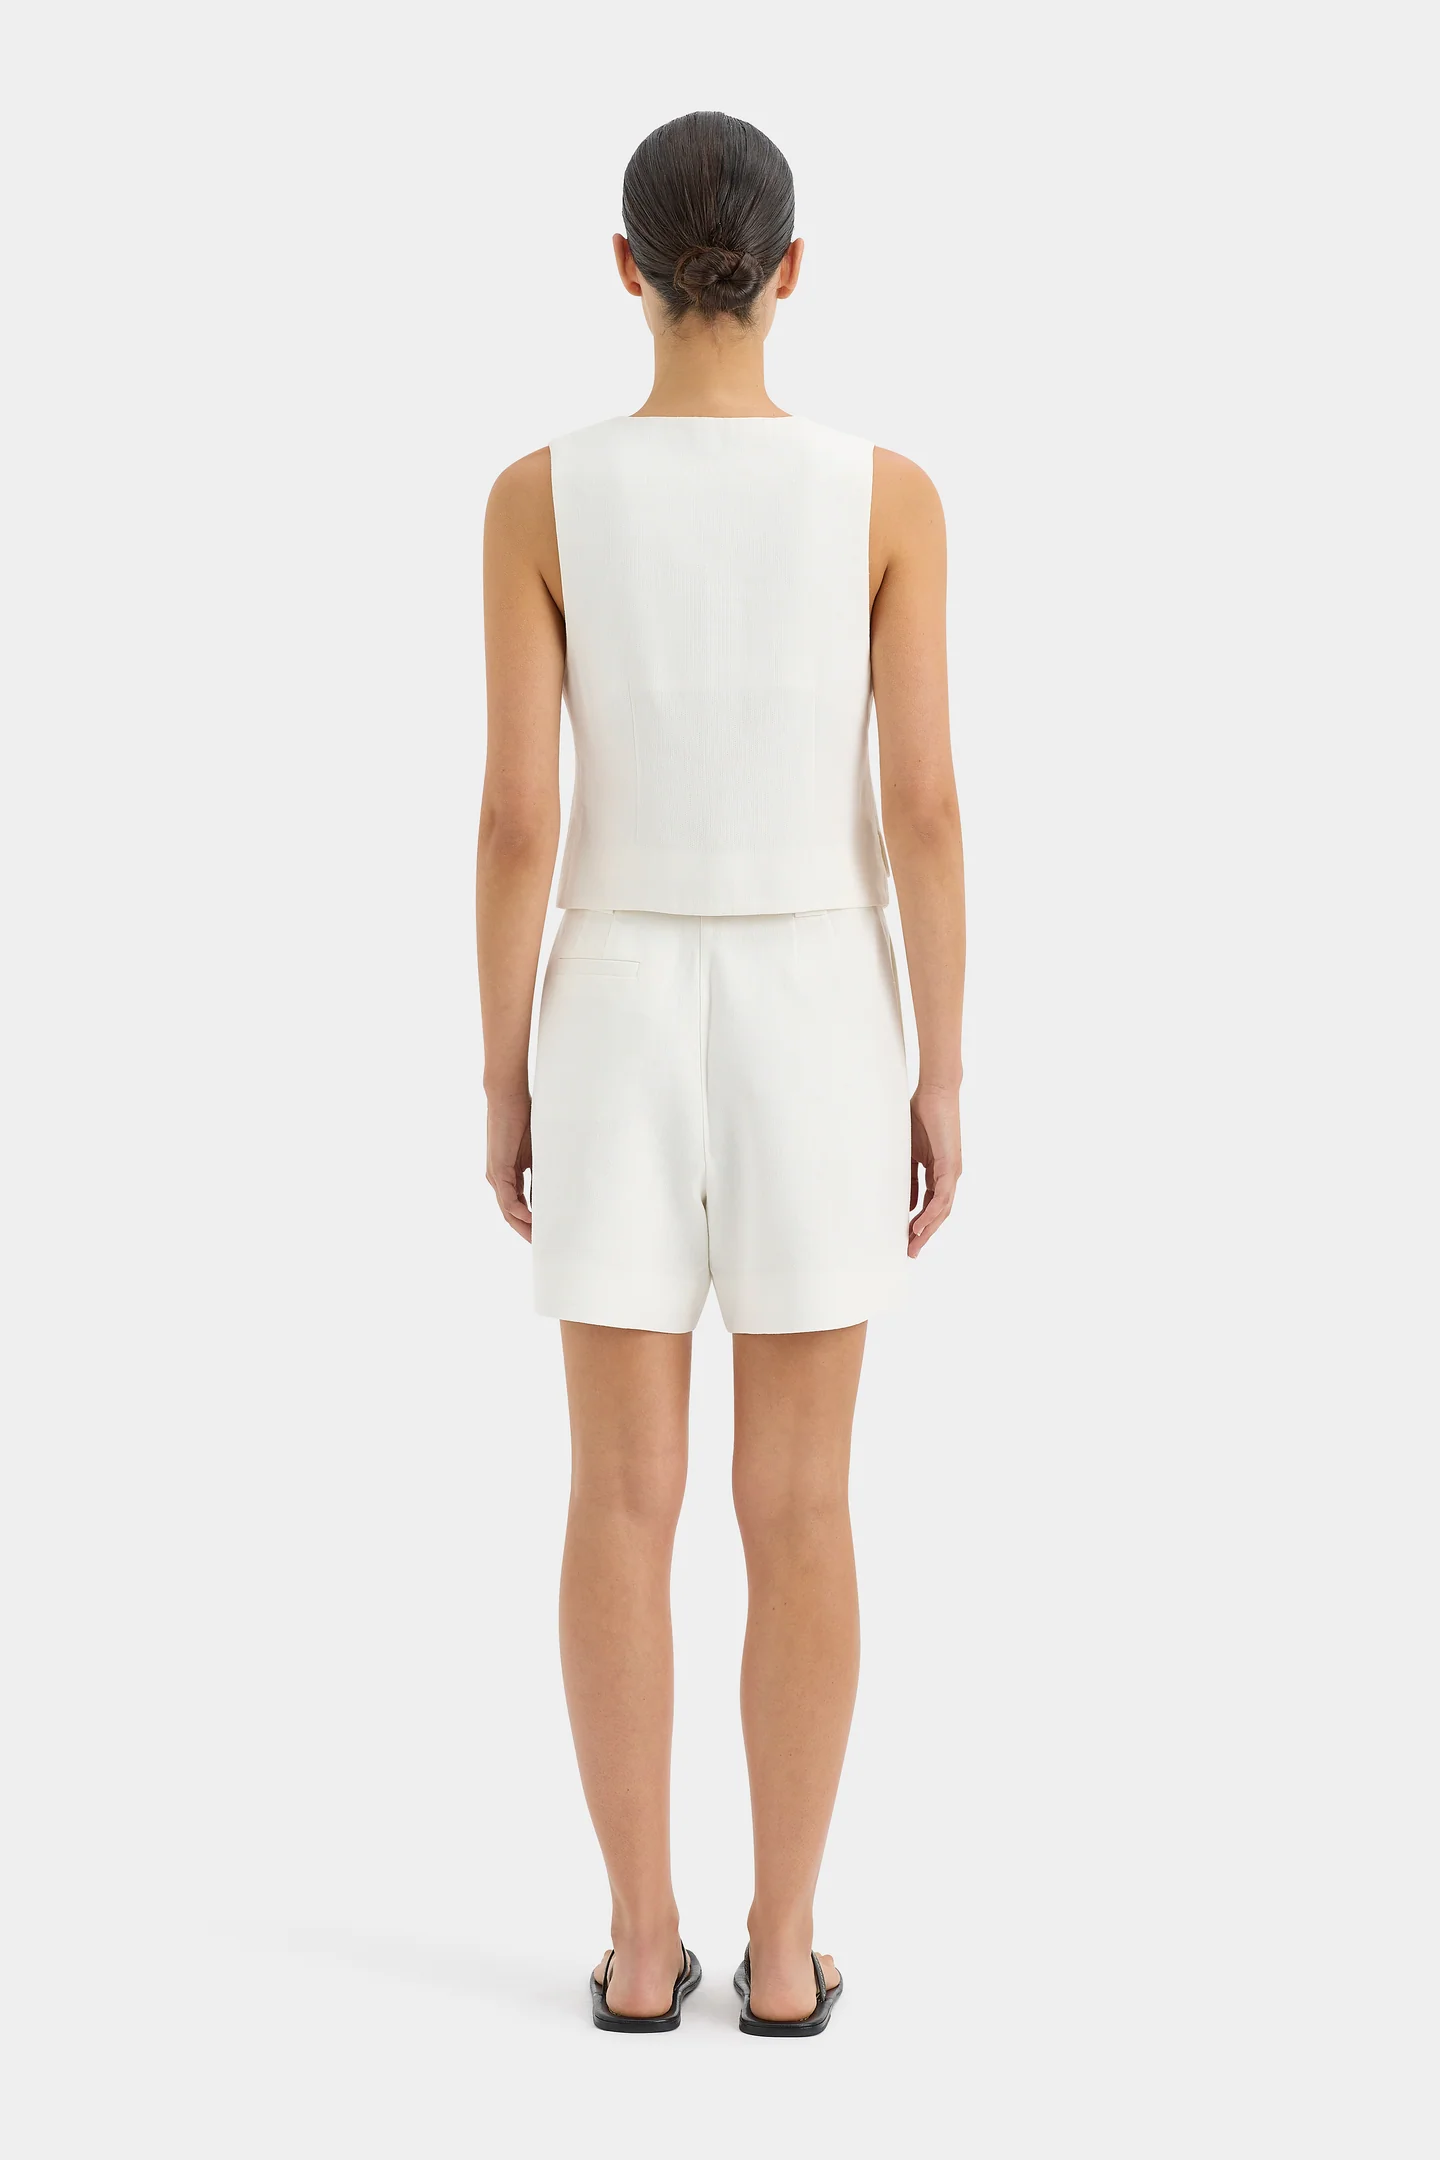 SIR. Clemence Tailored Short in Ivory available at The New Trend Australia.